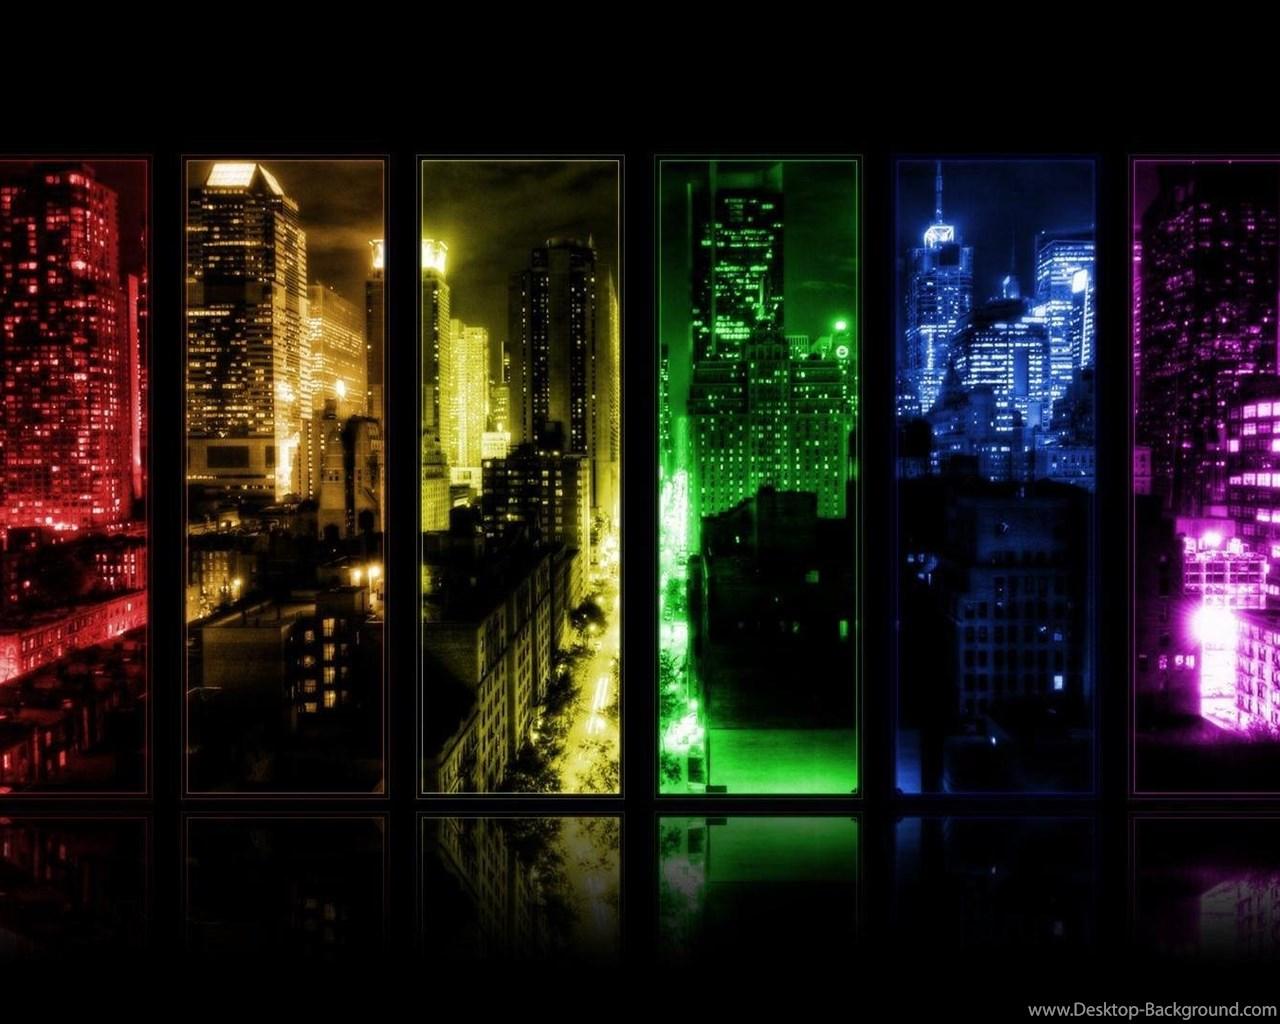 Abstract City Lights HD Wallpaper In Abstract Imageci.com City